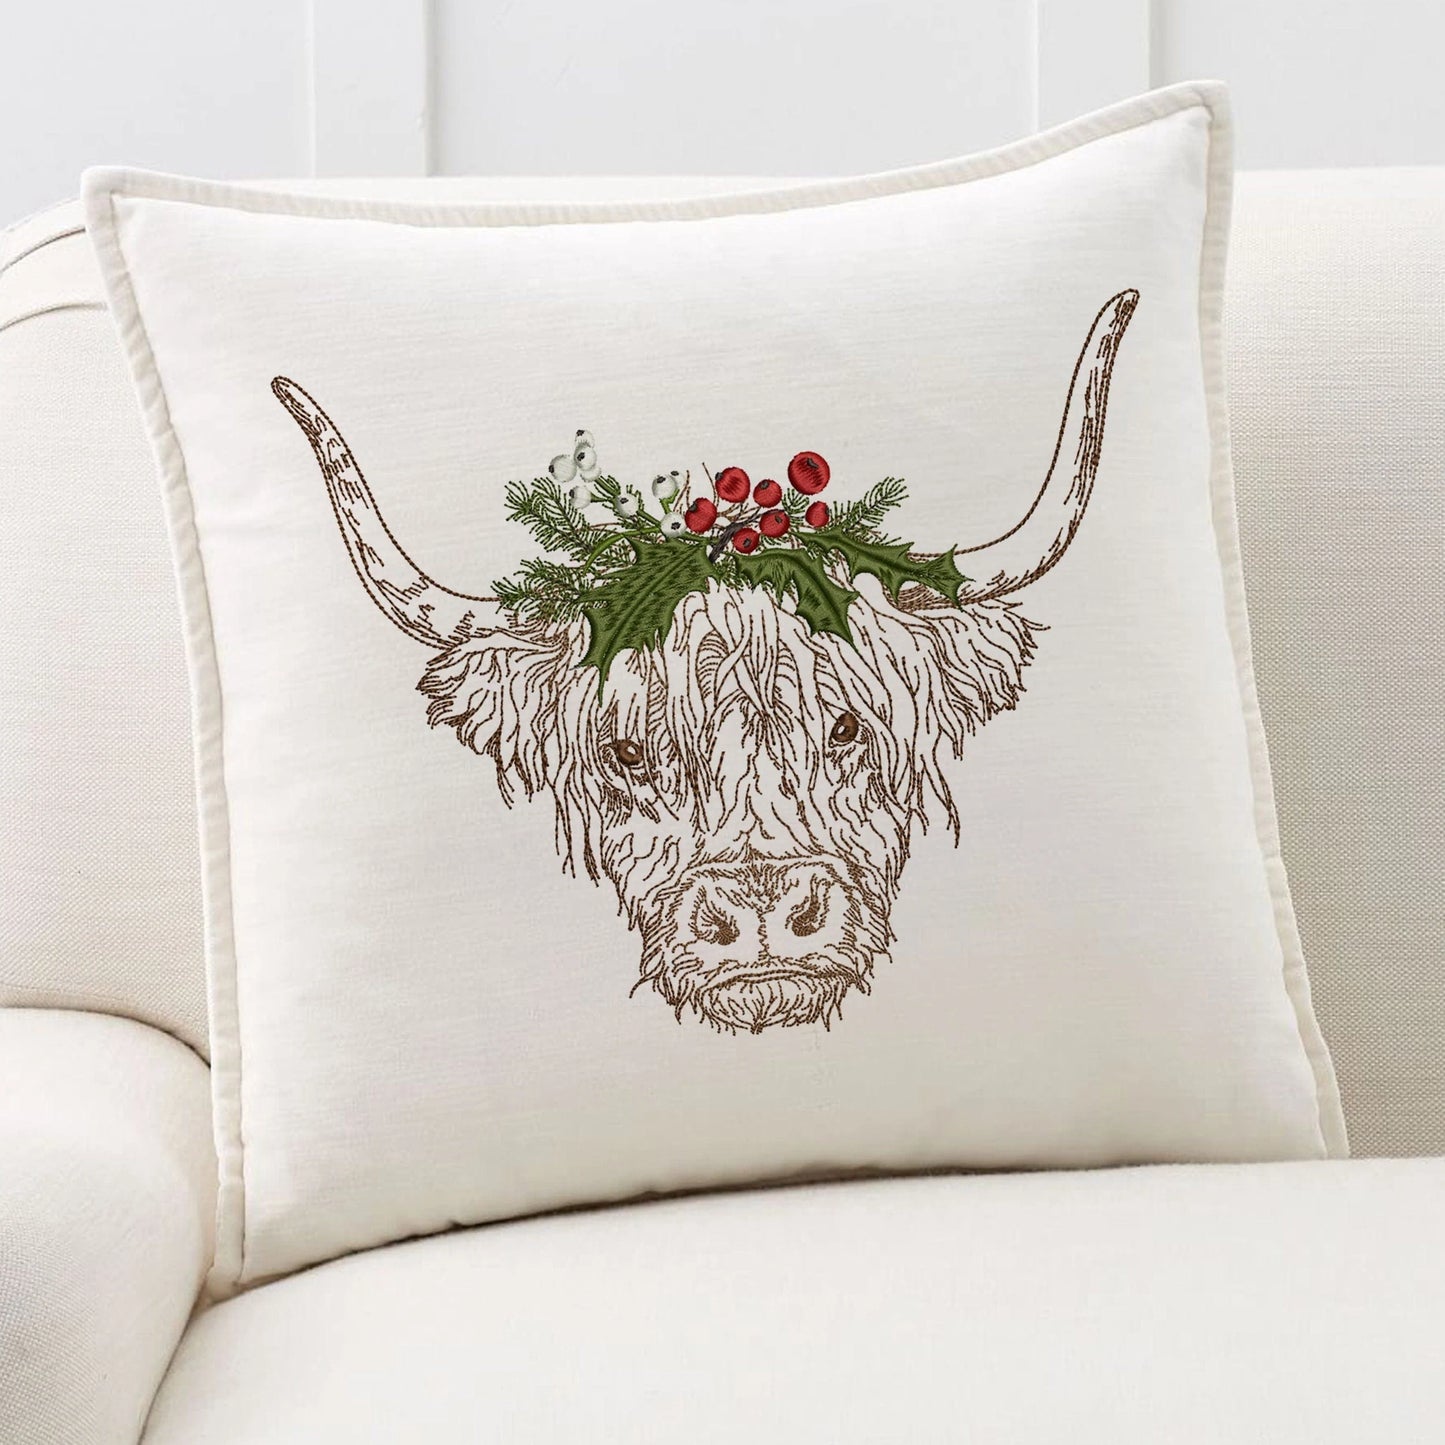 Christmas Highland Cow Machine Embroidery Design on pillow